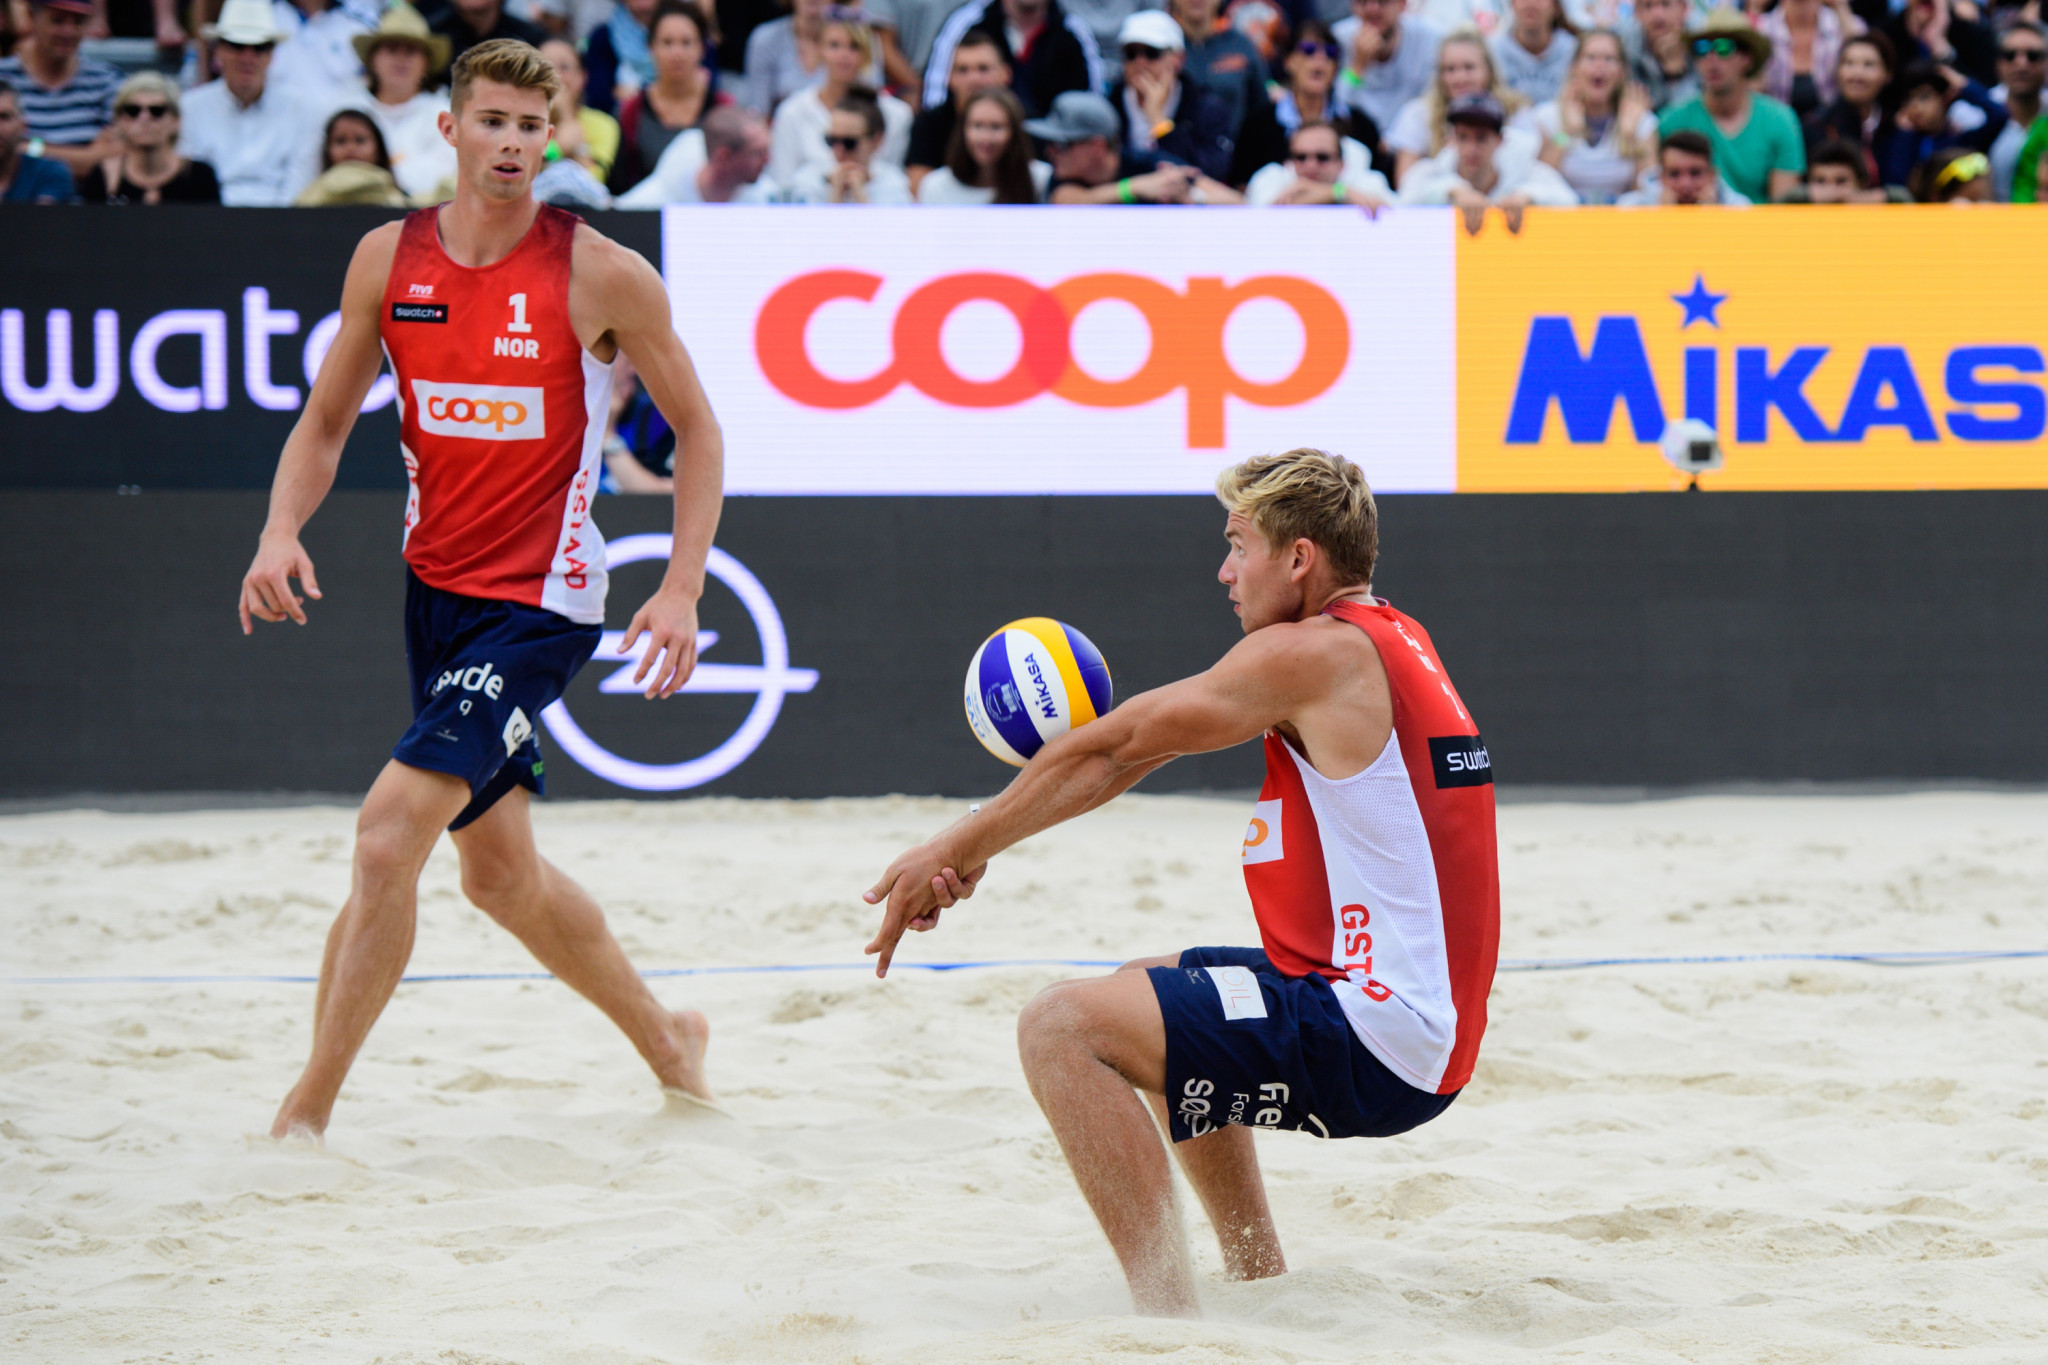 Norway’s Anders Mol and Christian Sørum top the men's world rankings ©FIVB